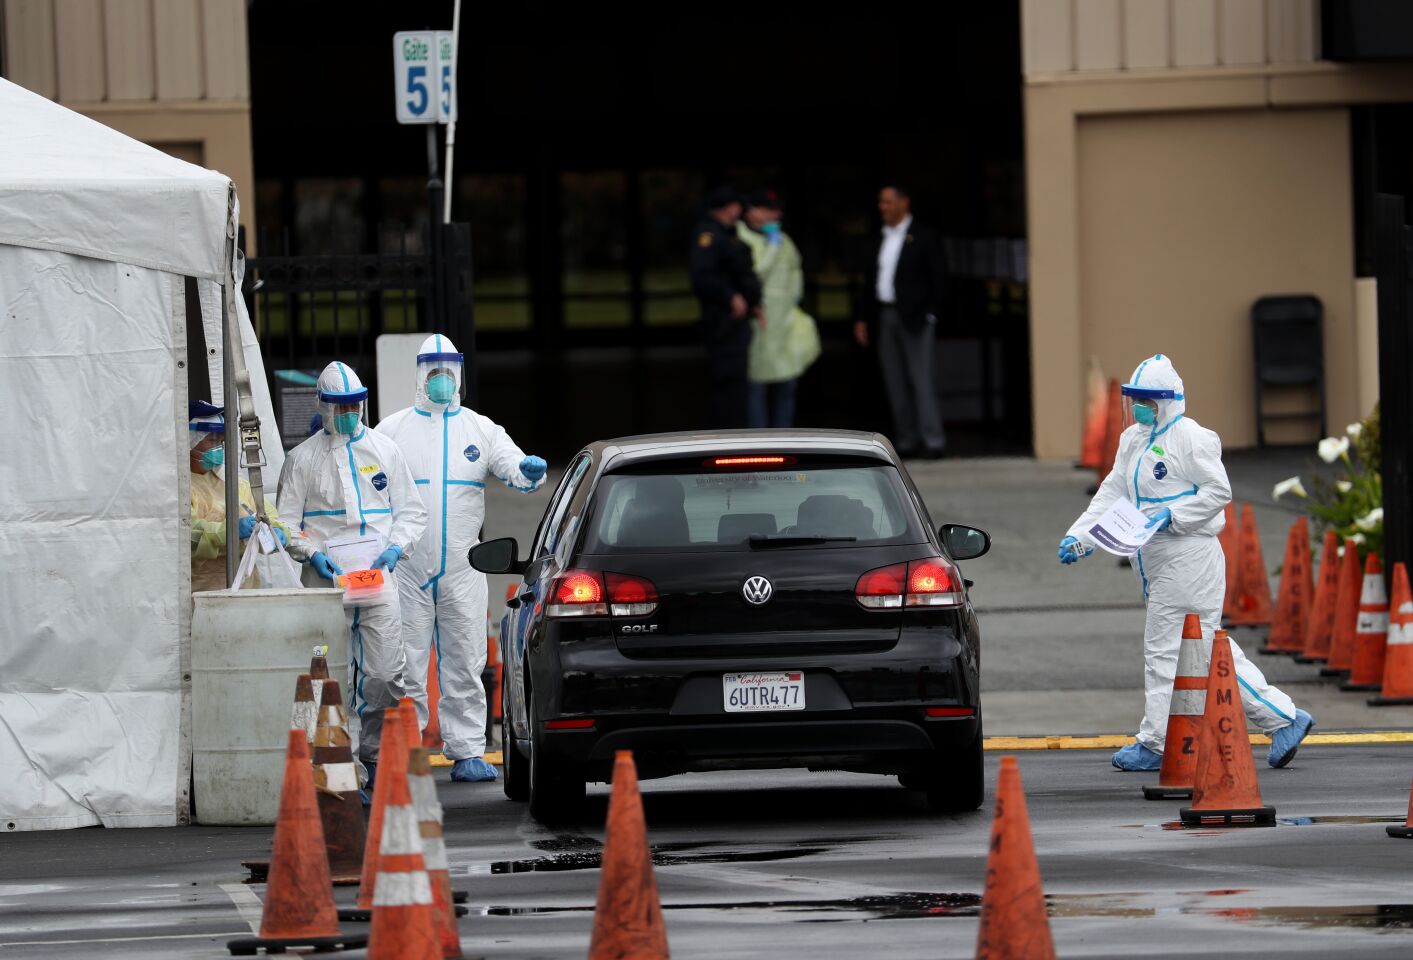 Medical personnel surround a car that is going through a coronavirus drive-thru test clinic at the San Mateo County Event Center. Drive-thru test clinics for COVID-19 are popping up across the country as more tests become available.